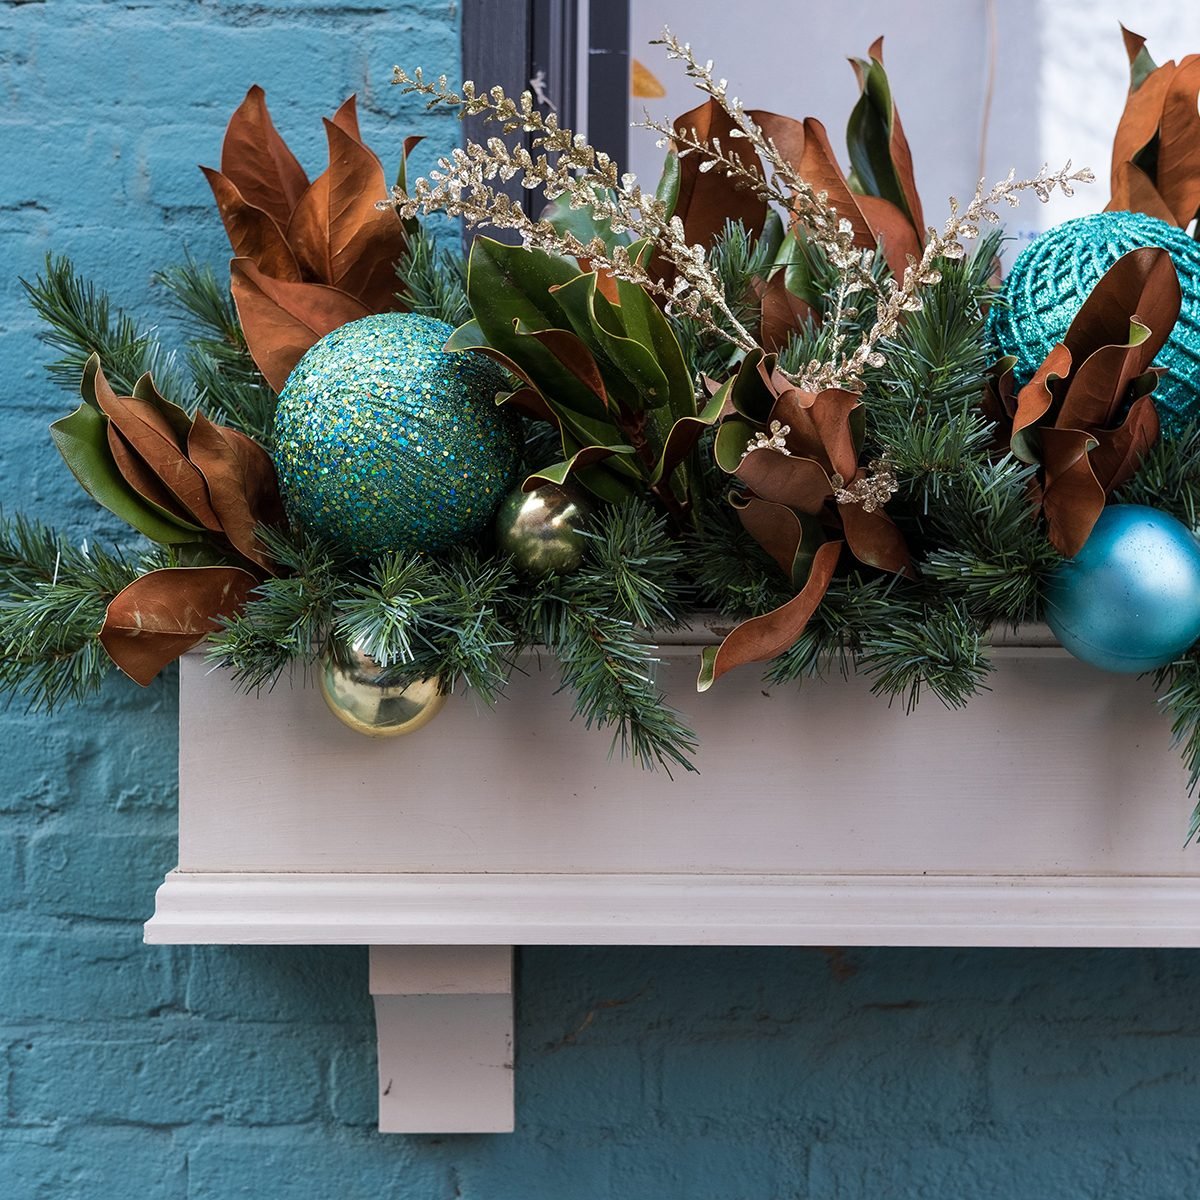 A close-up of the left side of a window planter box decorated for Christmas, set against a bright blue brick building.